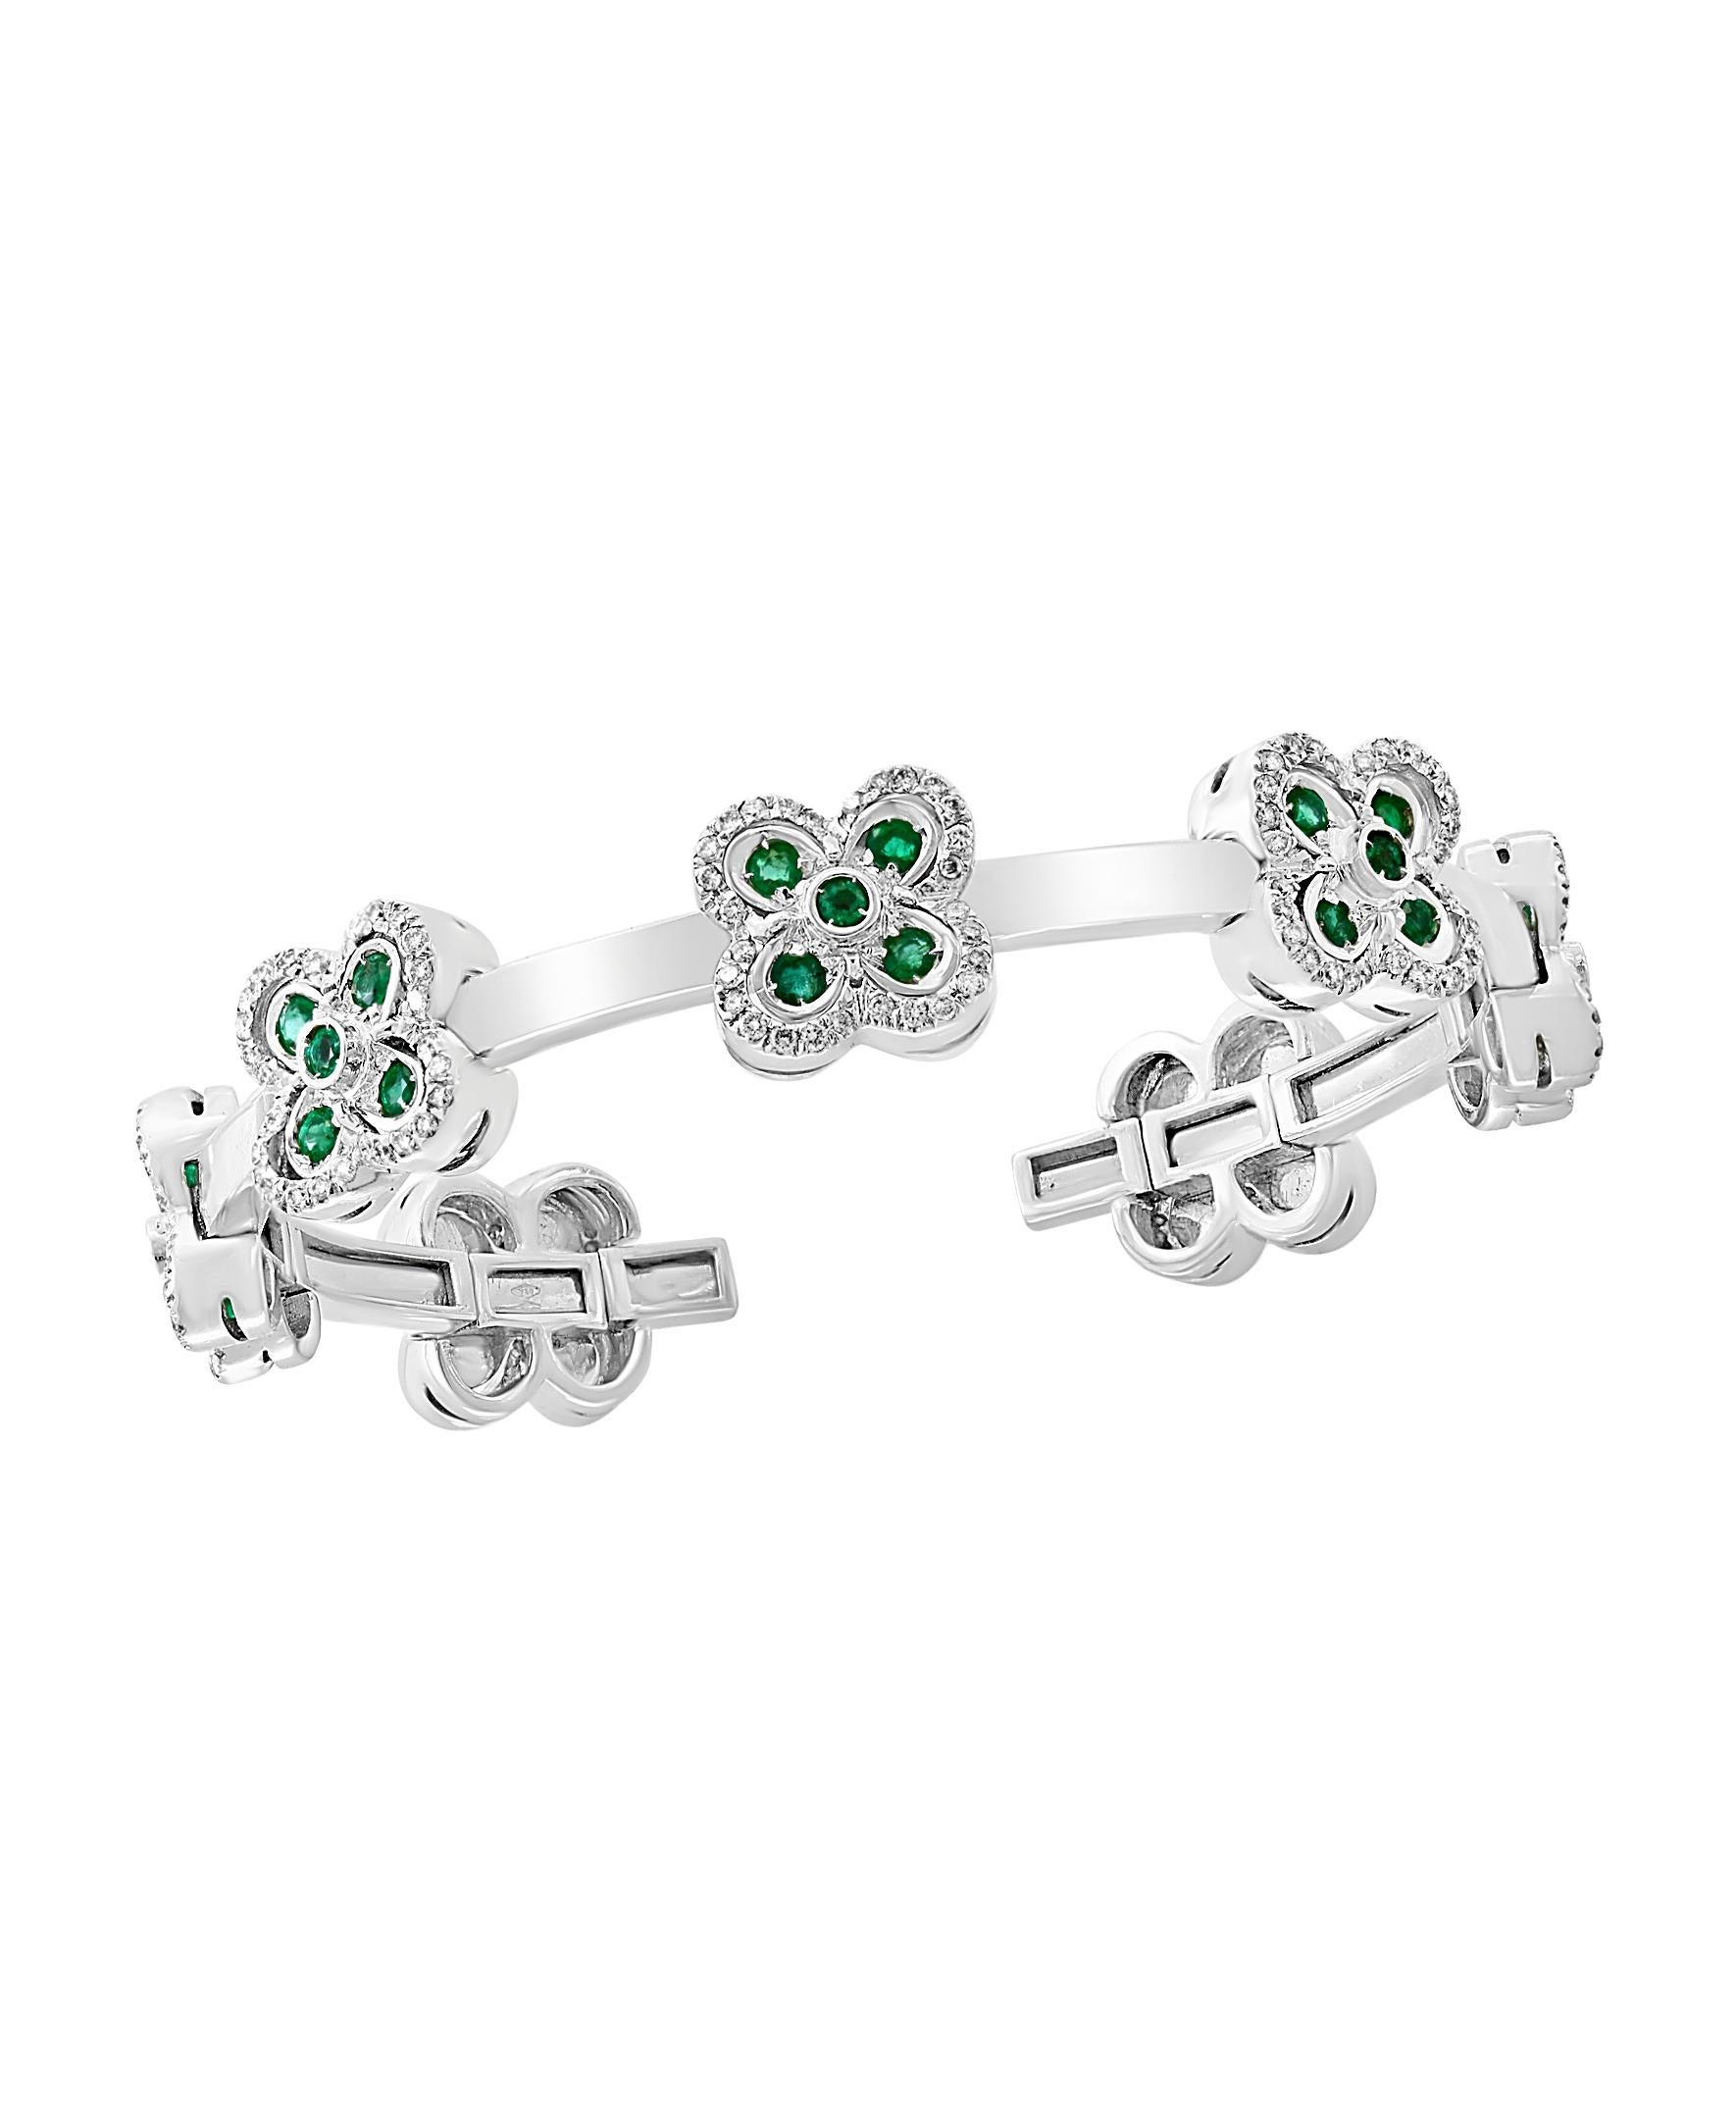 Emerald & Diamond & Gold 37 Grams  Cuff Bangle /Bracelet In 18 Karat White Gold
It features a bangle style  Bracelet crafted from an 18 Karat  White  gold and embedded with  7 Flowers out of which 5 flowers  have Emerald diamonds  petals surrounded